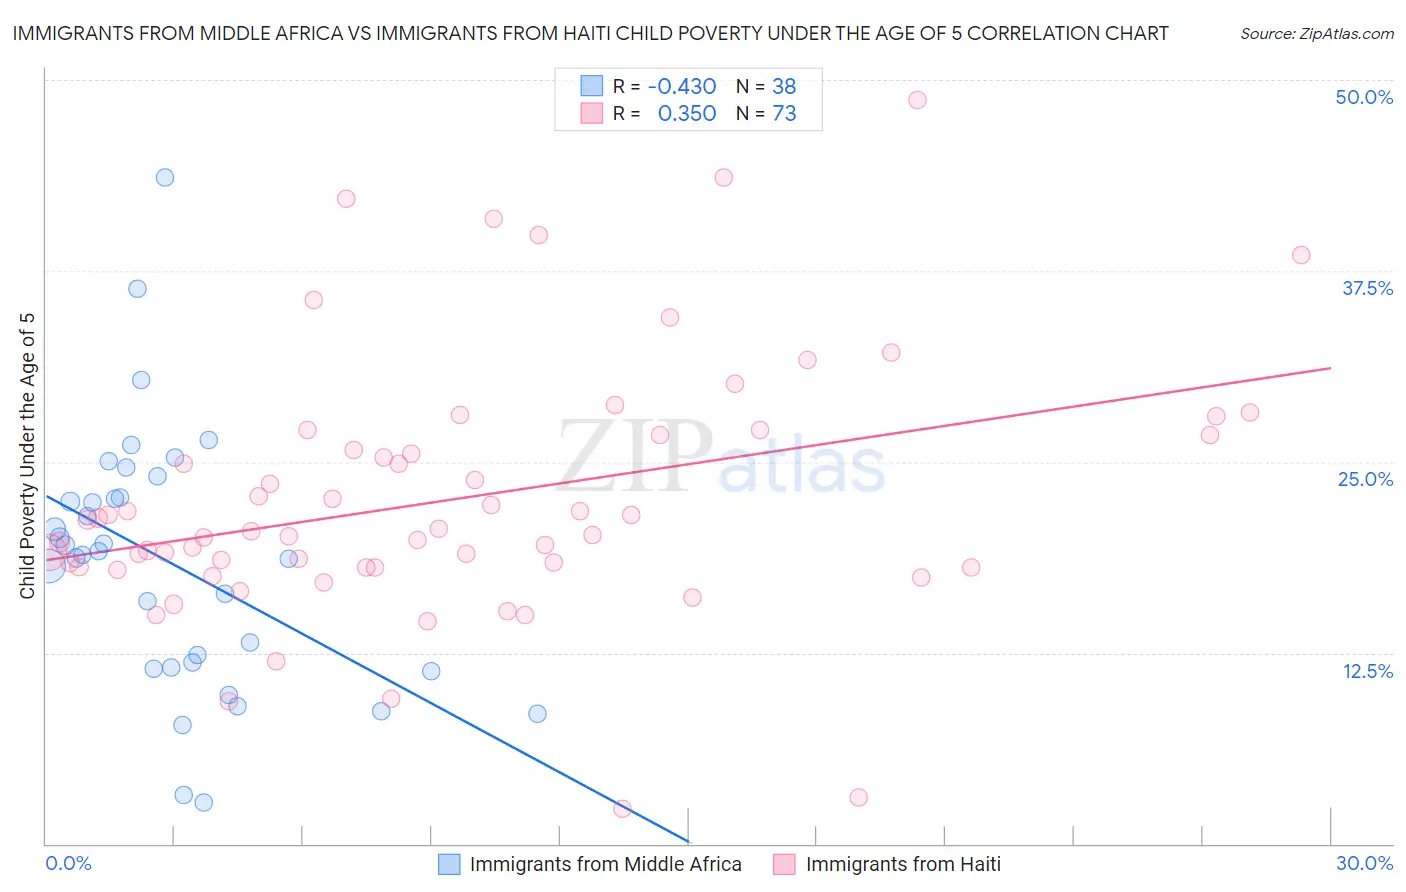 Immigrants from Middle Africa vs Immigrants from Haiti Child Poverty Under the Age of 5